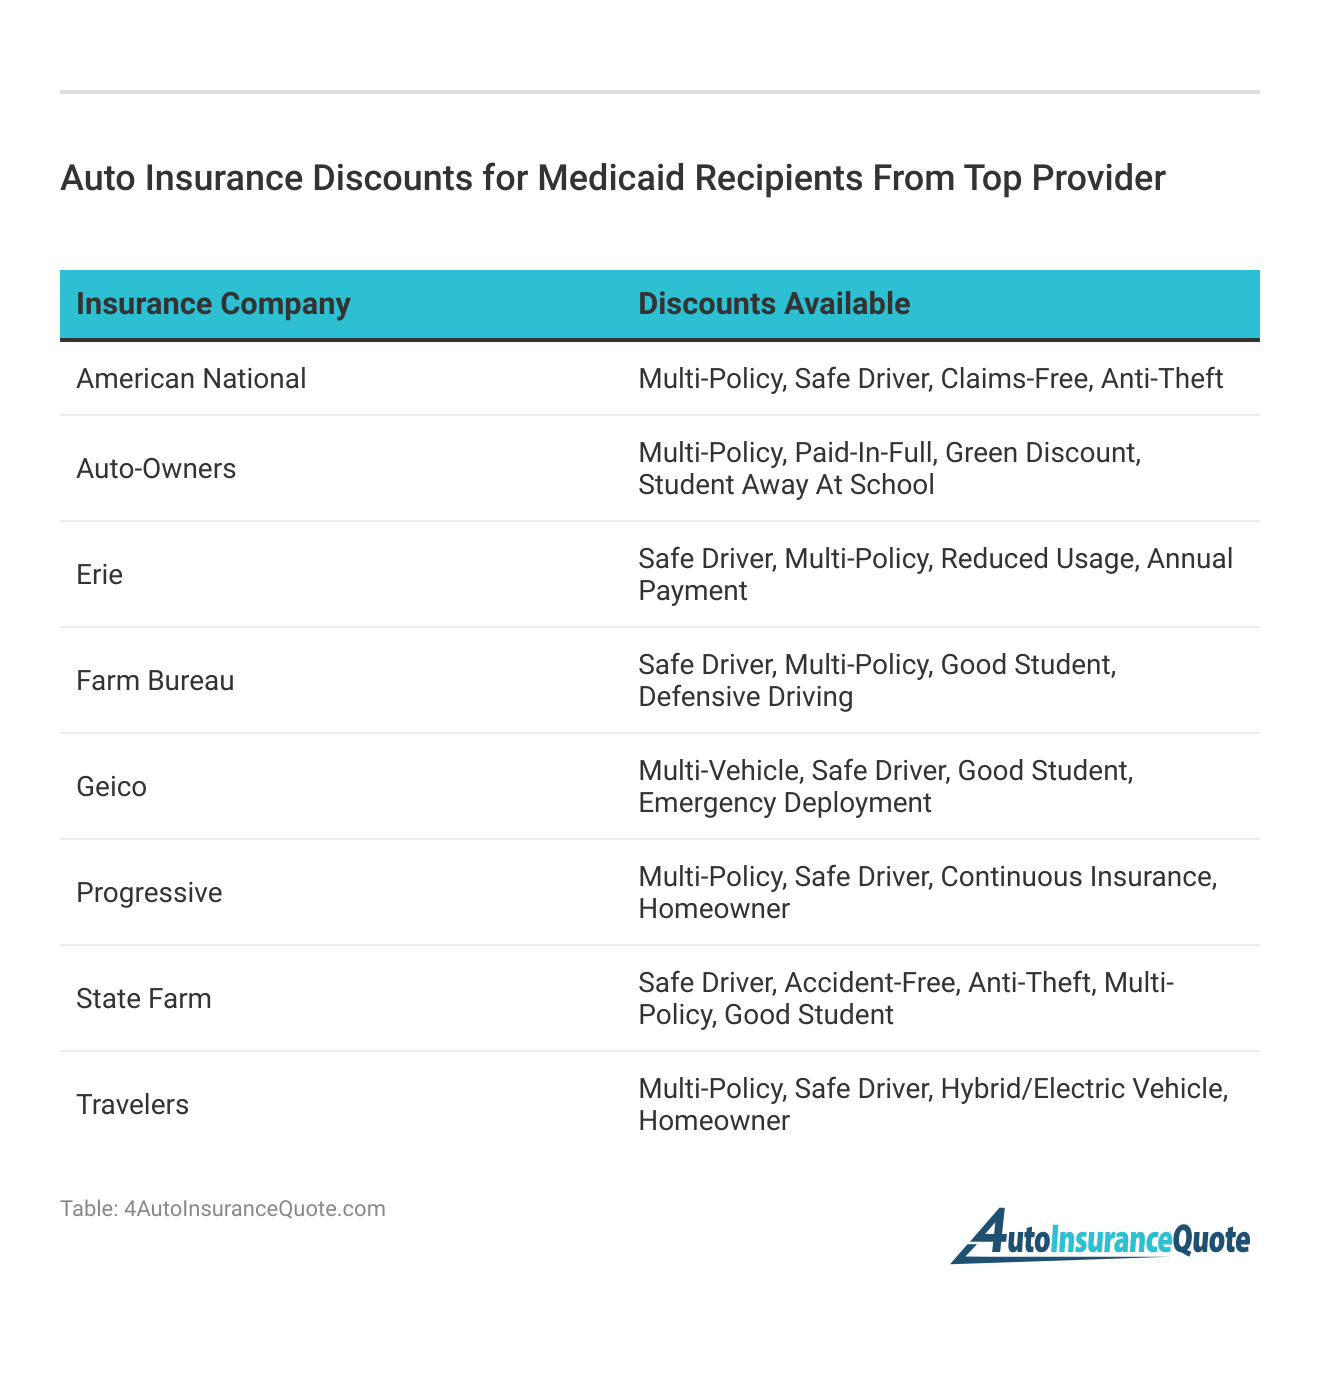 <h3>Auto Insurance Discounts for Medicaid Recipients From Top Provider</h3>